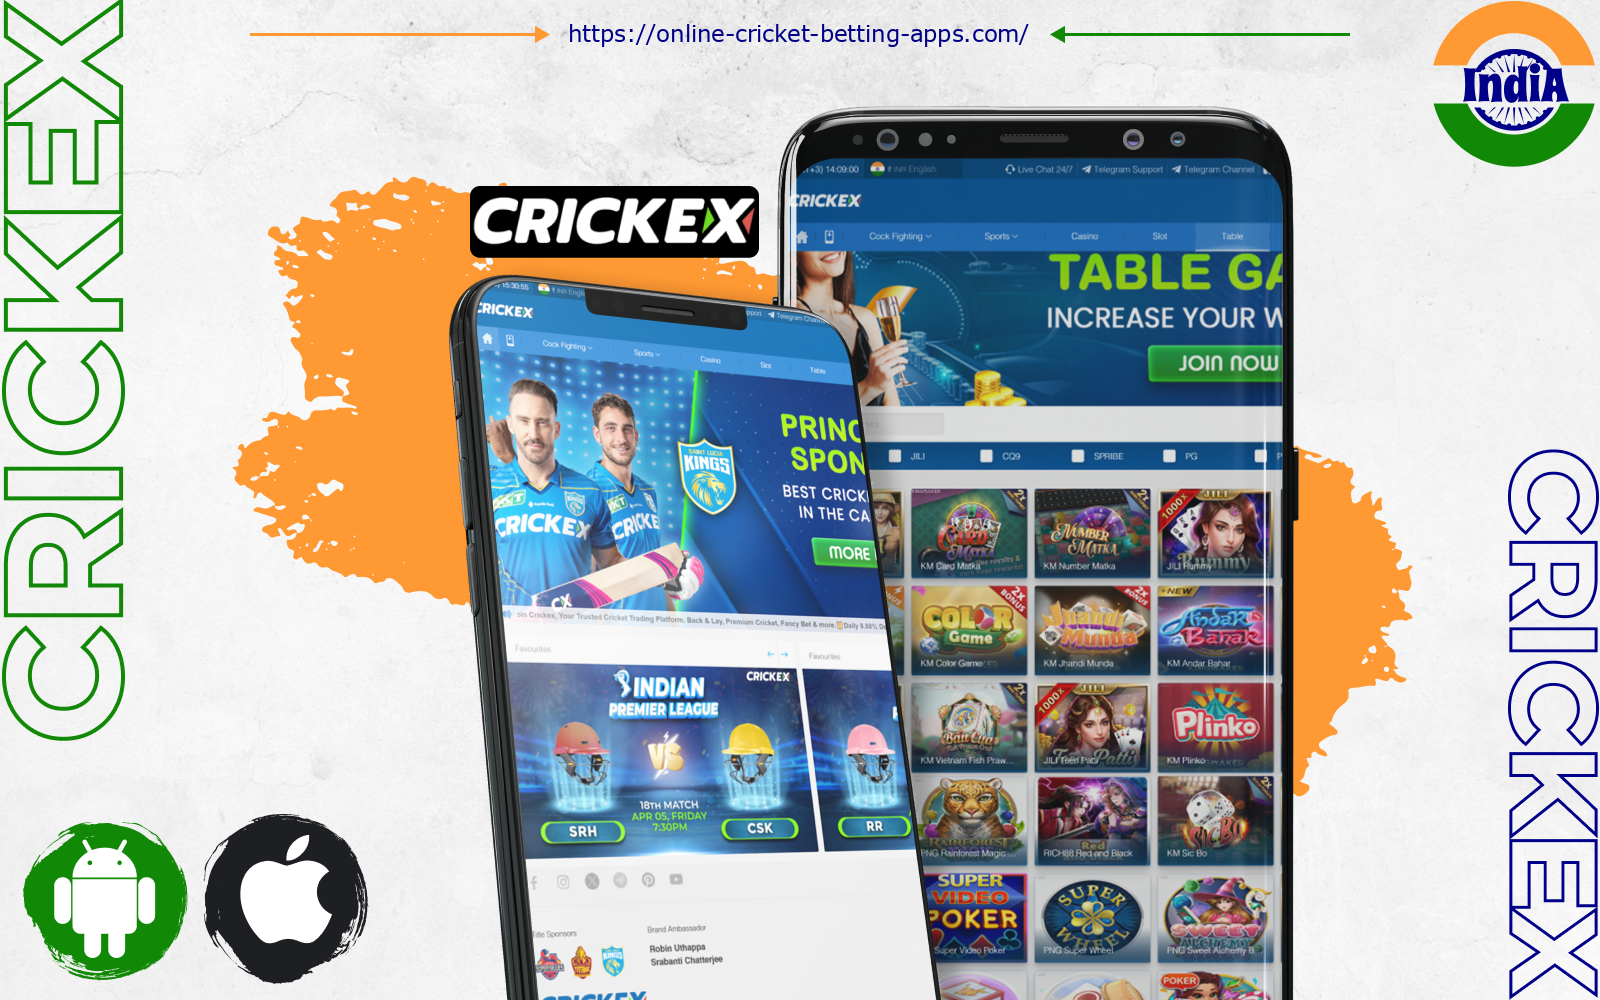 The Crickex app has quickly gained popularity among the Indian audience